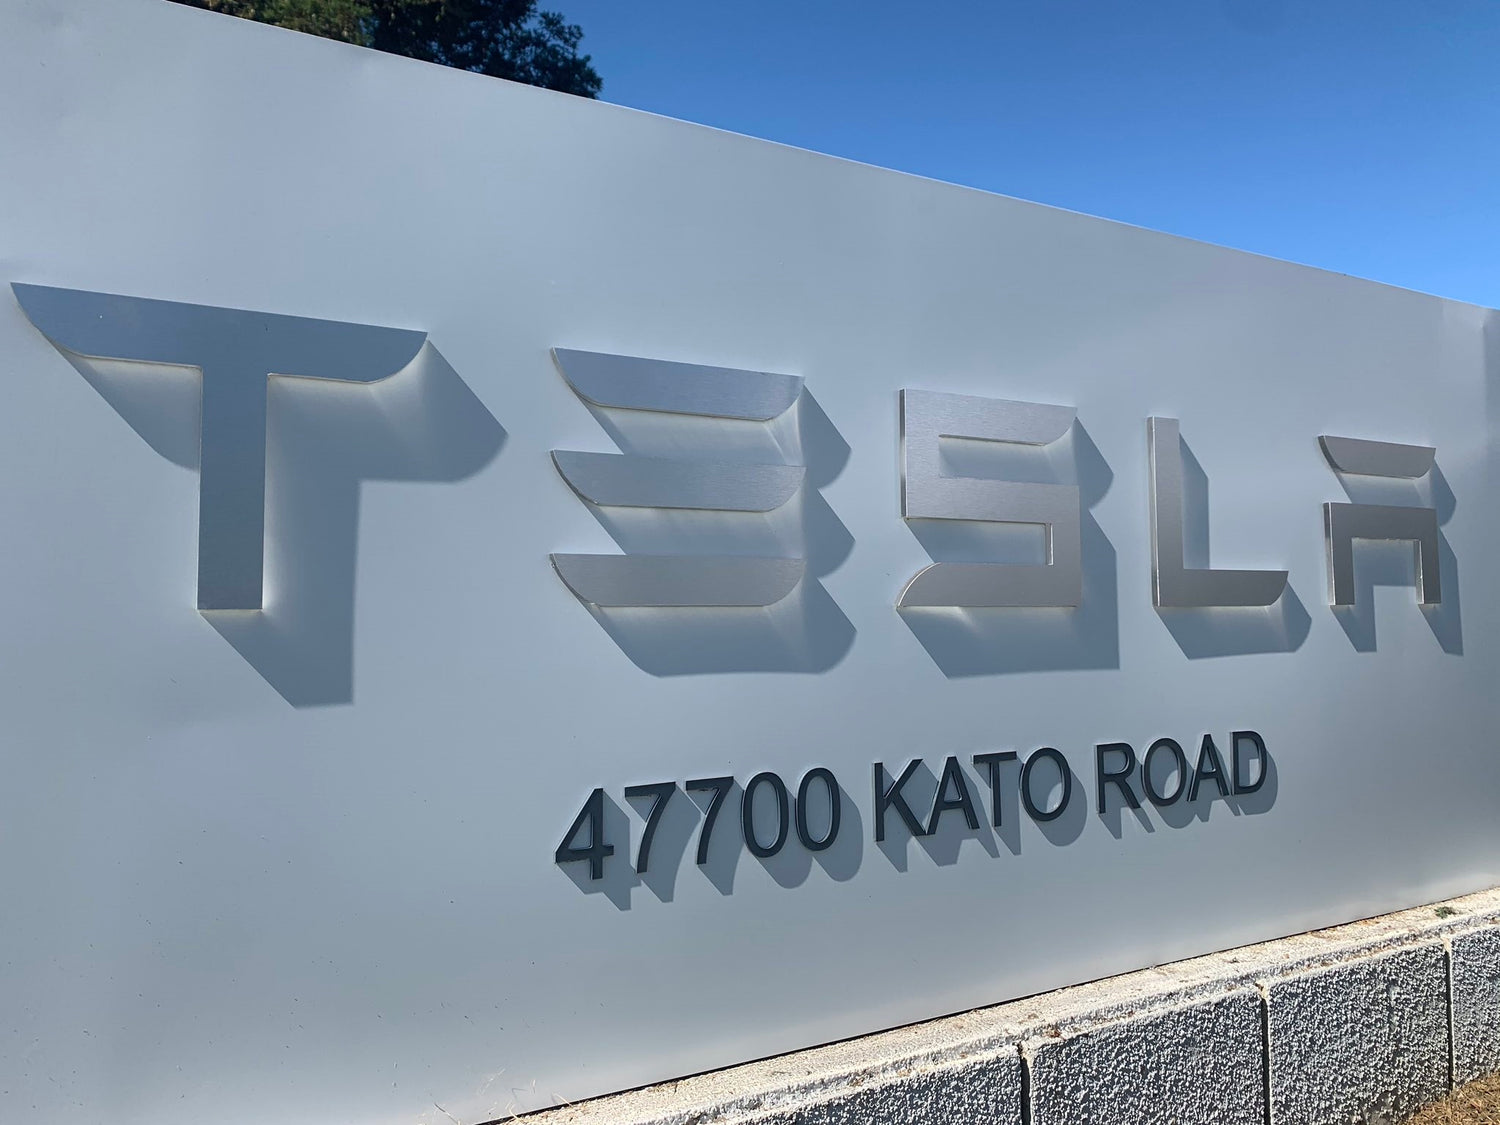 Tesla Roadrunner Project at Kato Road Is World’s Most Advanced Battery Line